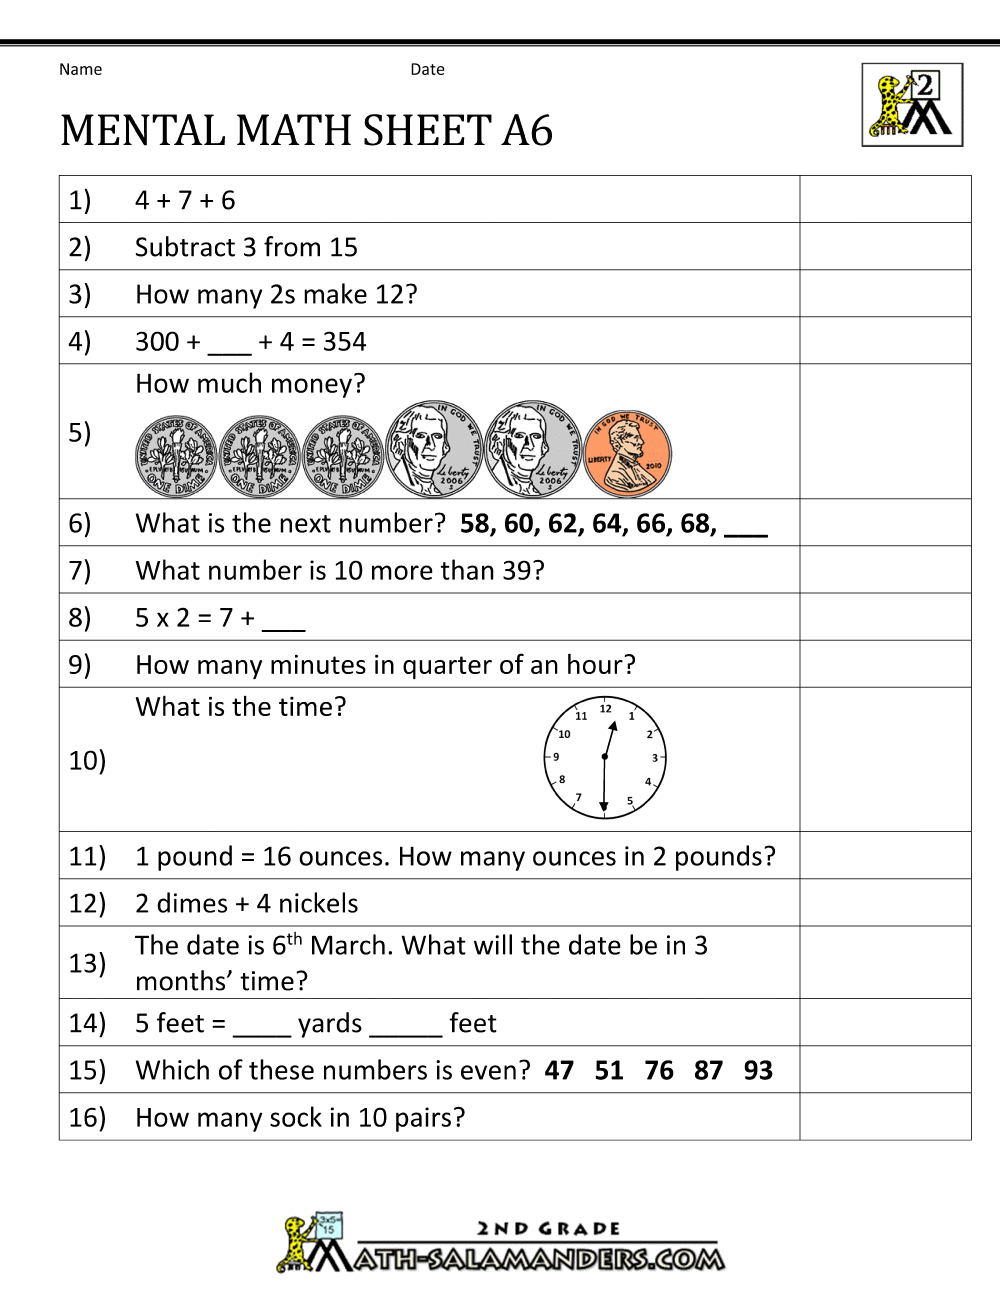 daily mental math practice questions grade 3